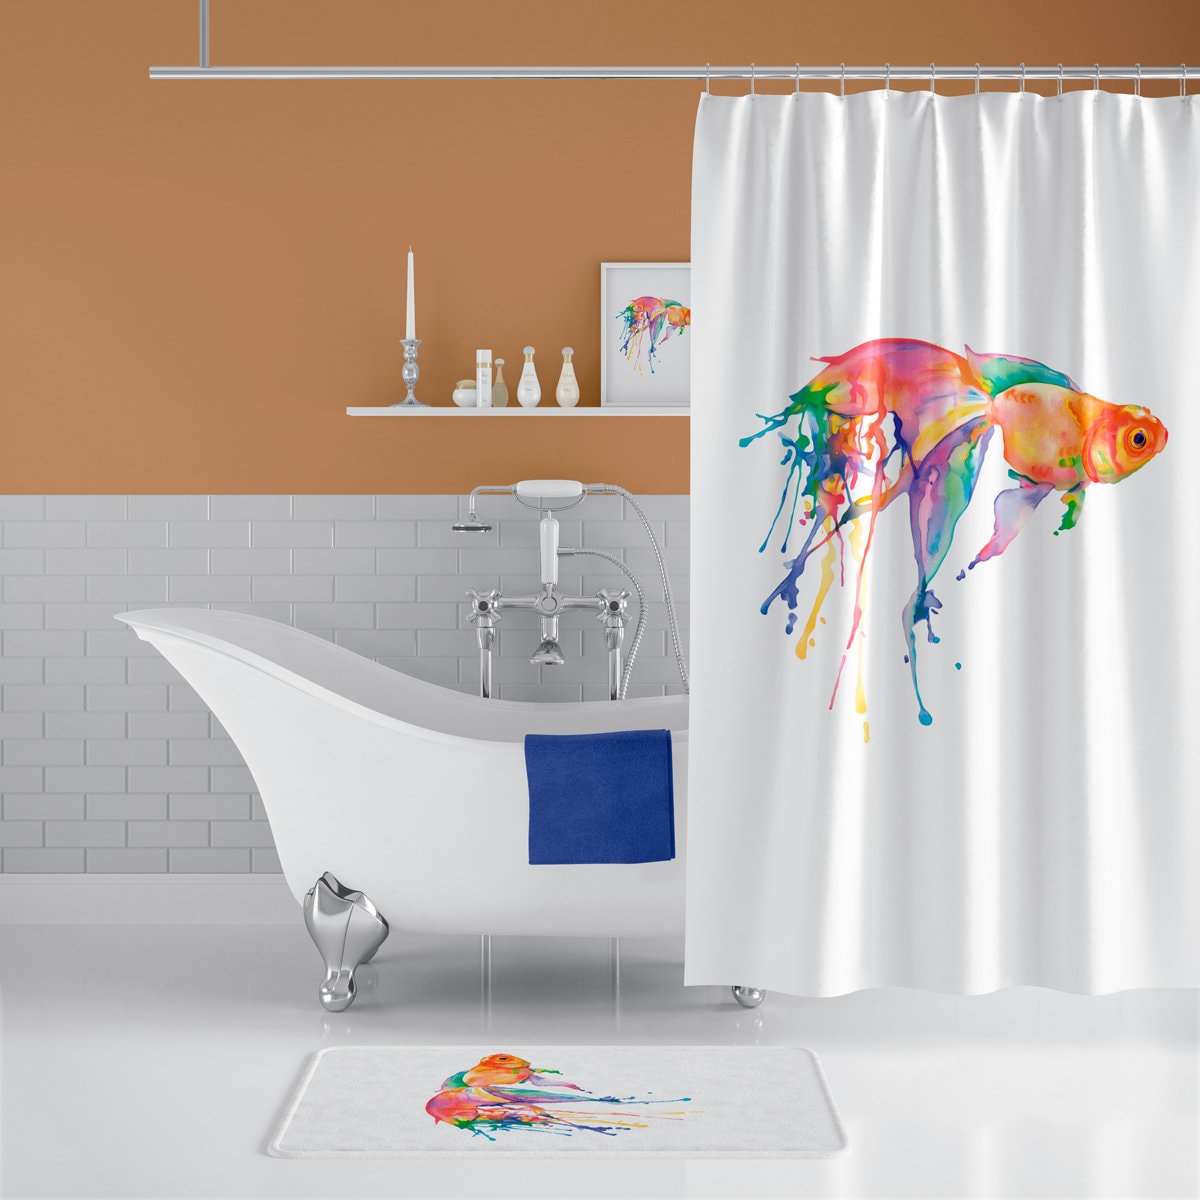 59x71in Waterproof Shower Curtain Polyester Dolphin Fish Ocean with 10 Hooks for Bathroom Hotel, Size: 59 x 71, Blue